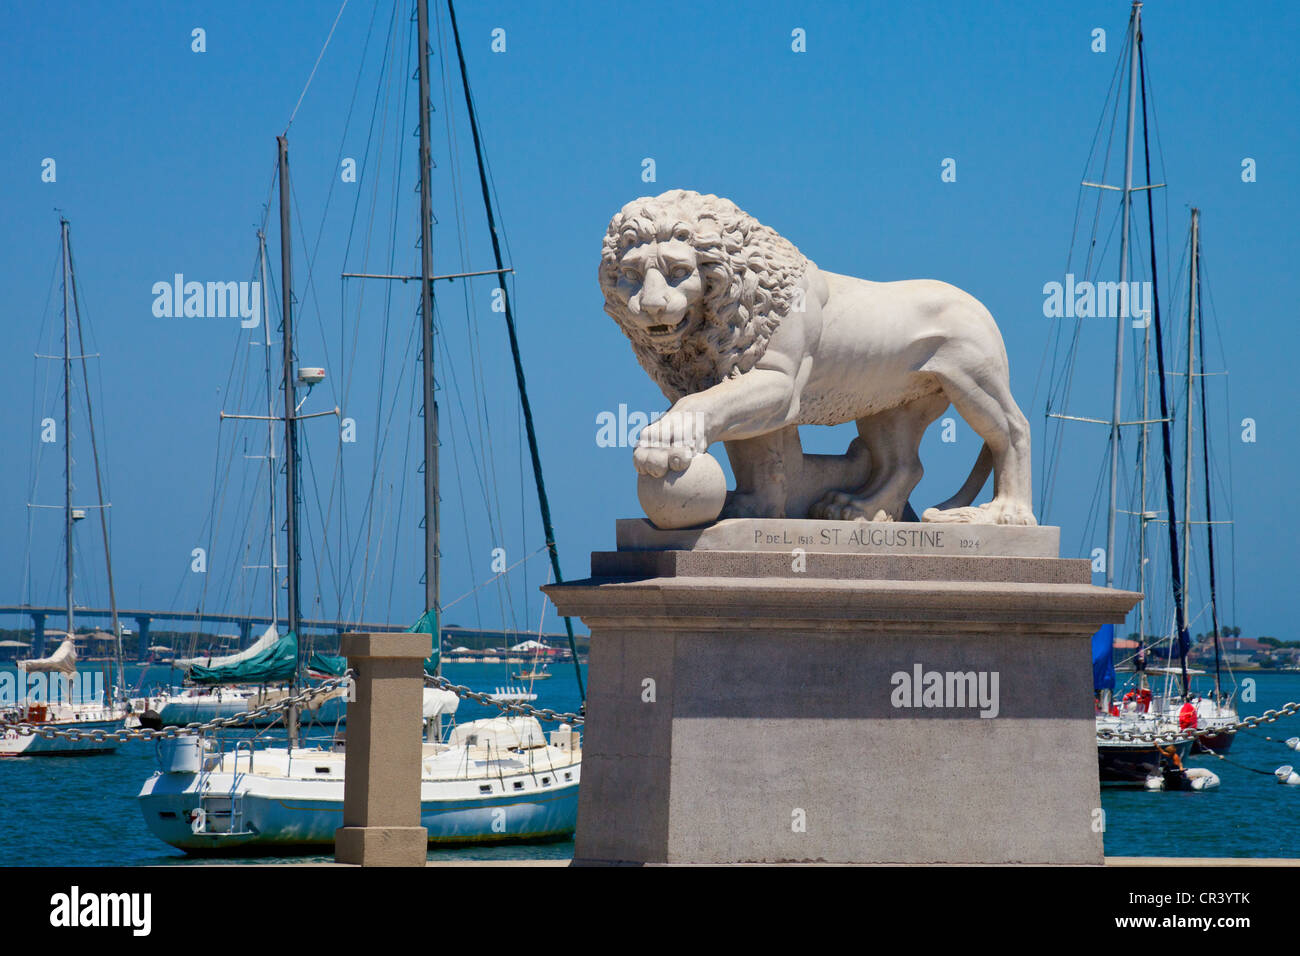 Sculpture of a marble Medici lion at the Bridge of Lions, St Augustine, Florida Stock Photo